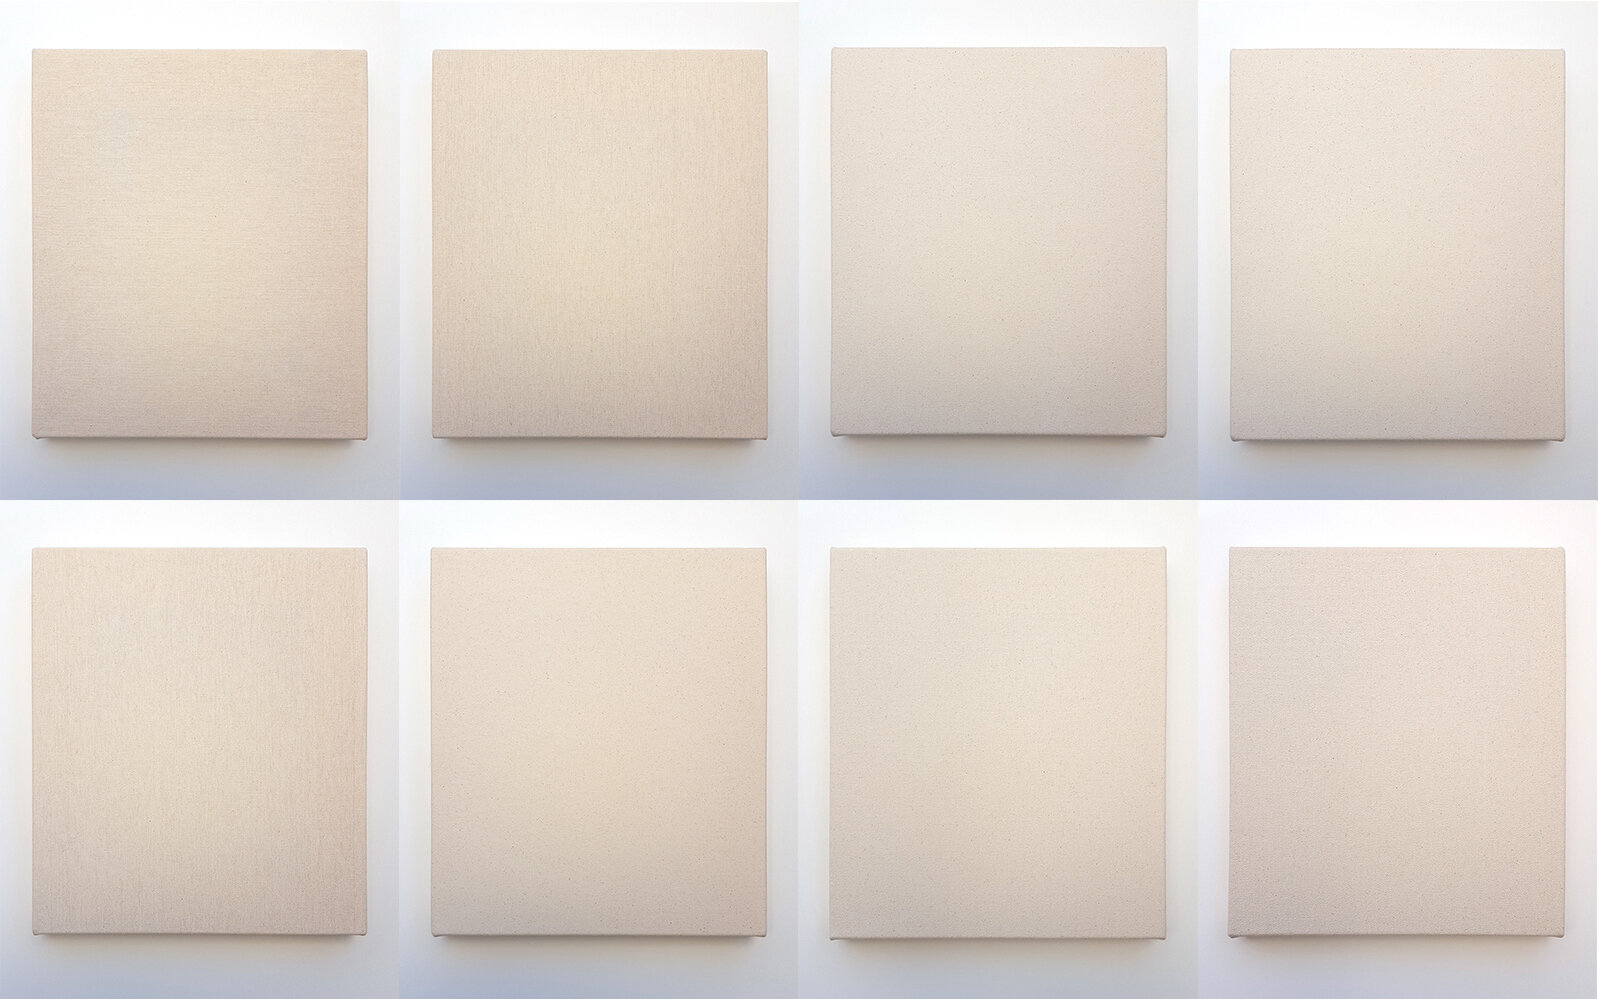 Common Condition, 2020- , various unprimed cotton canvas stretched over canvas bars, each at 14” x 12” (composite image)